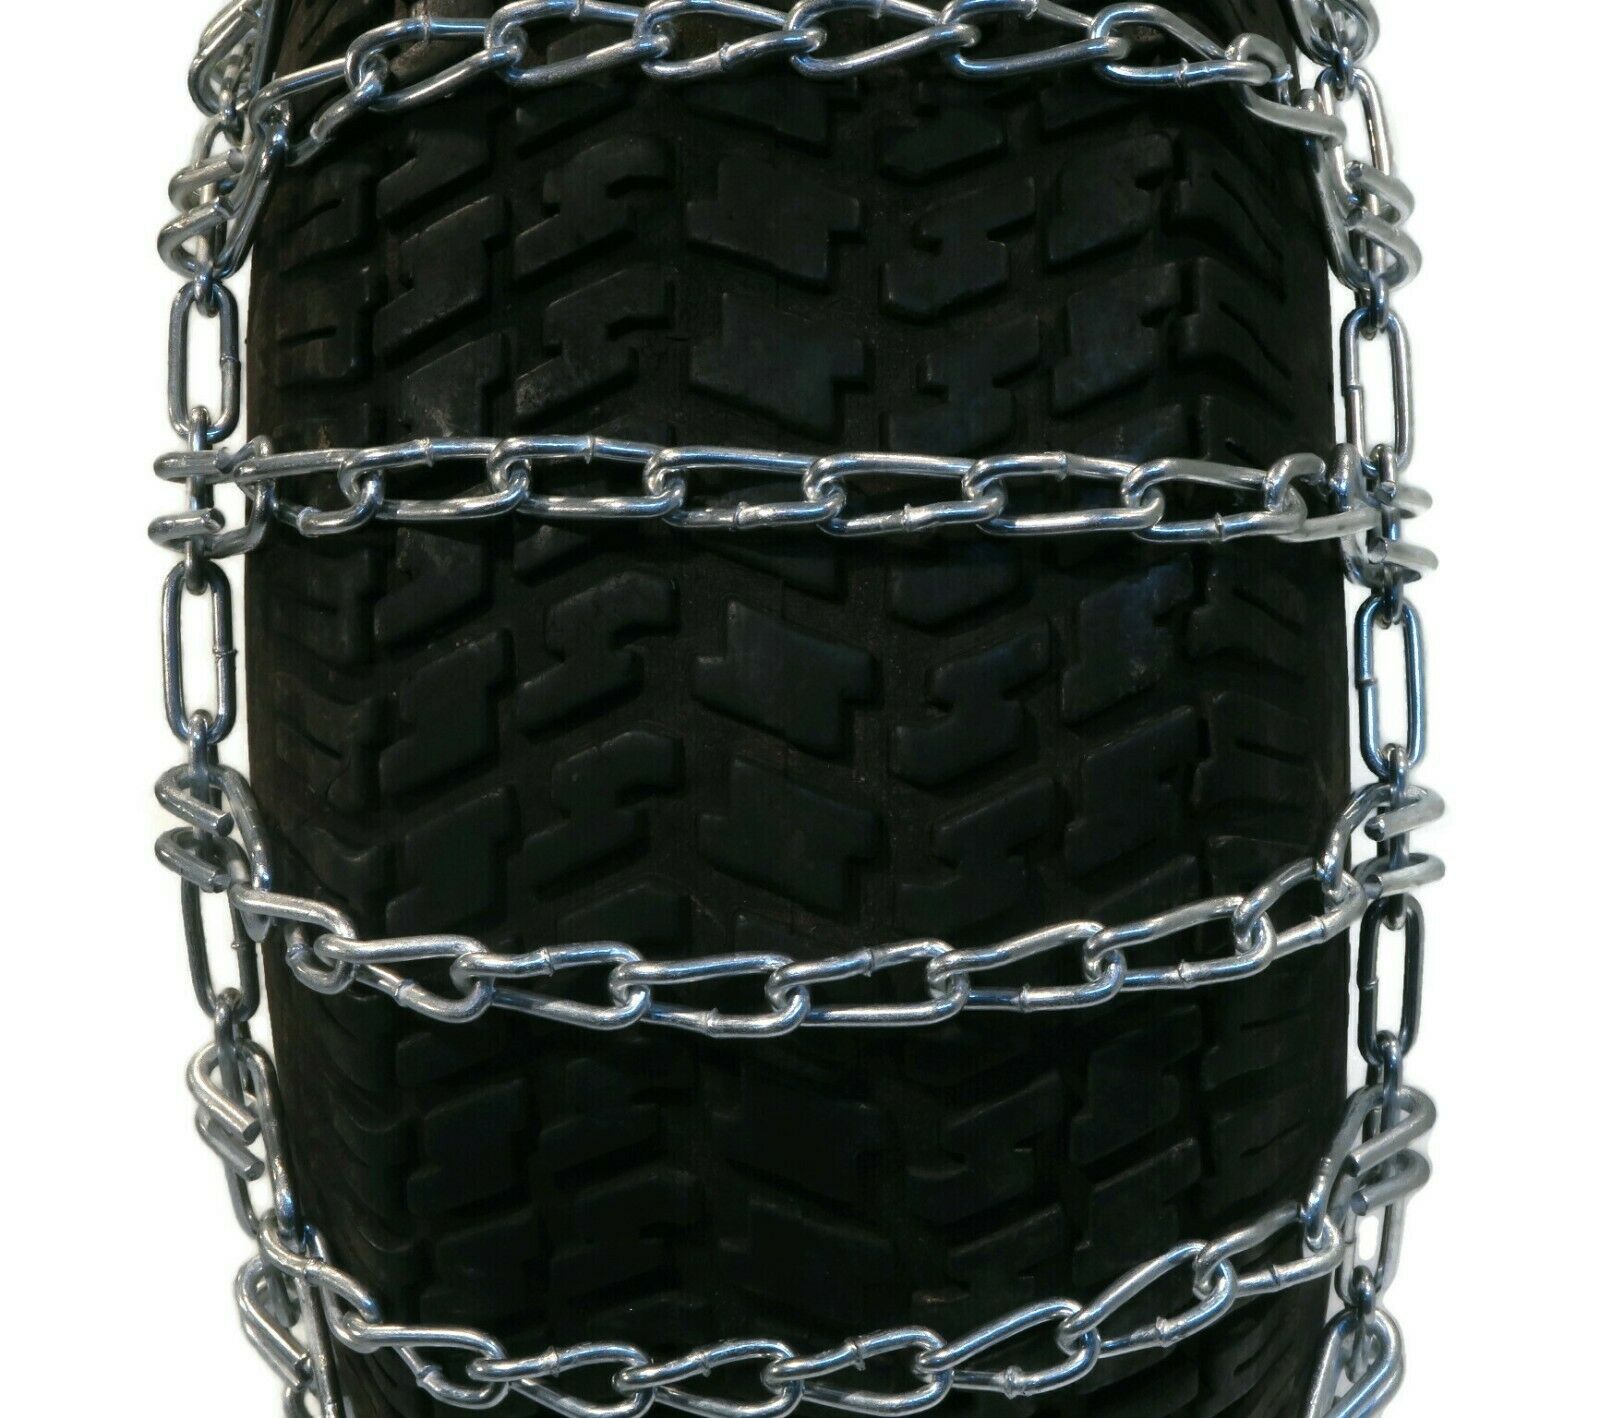 PAIR 2 Link TIRE CHAINS 26x12-12 for Simplicty Lawn Mower Garden Tractor Rider by The ROP Shop - image 5 of 6